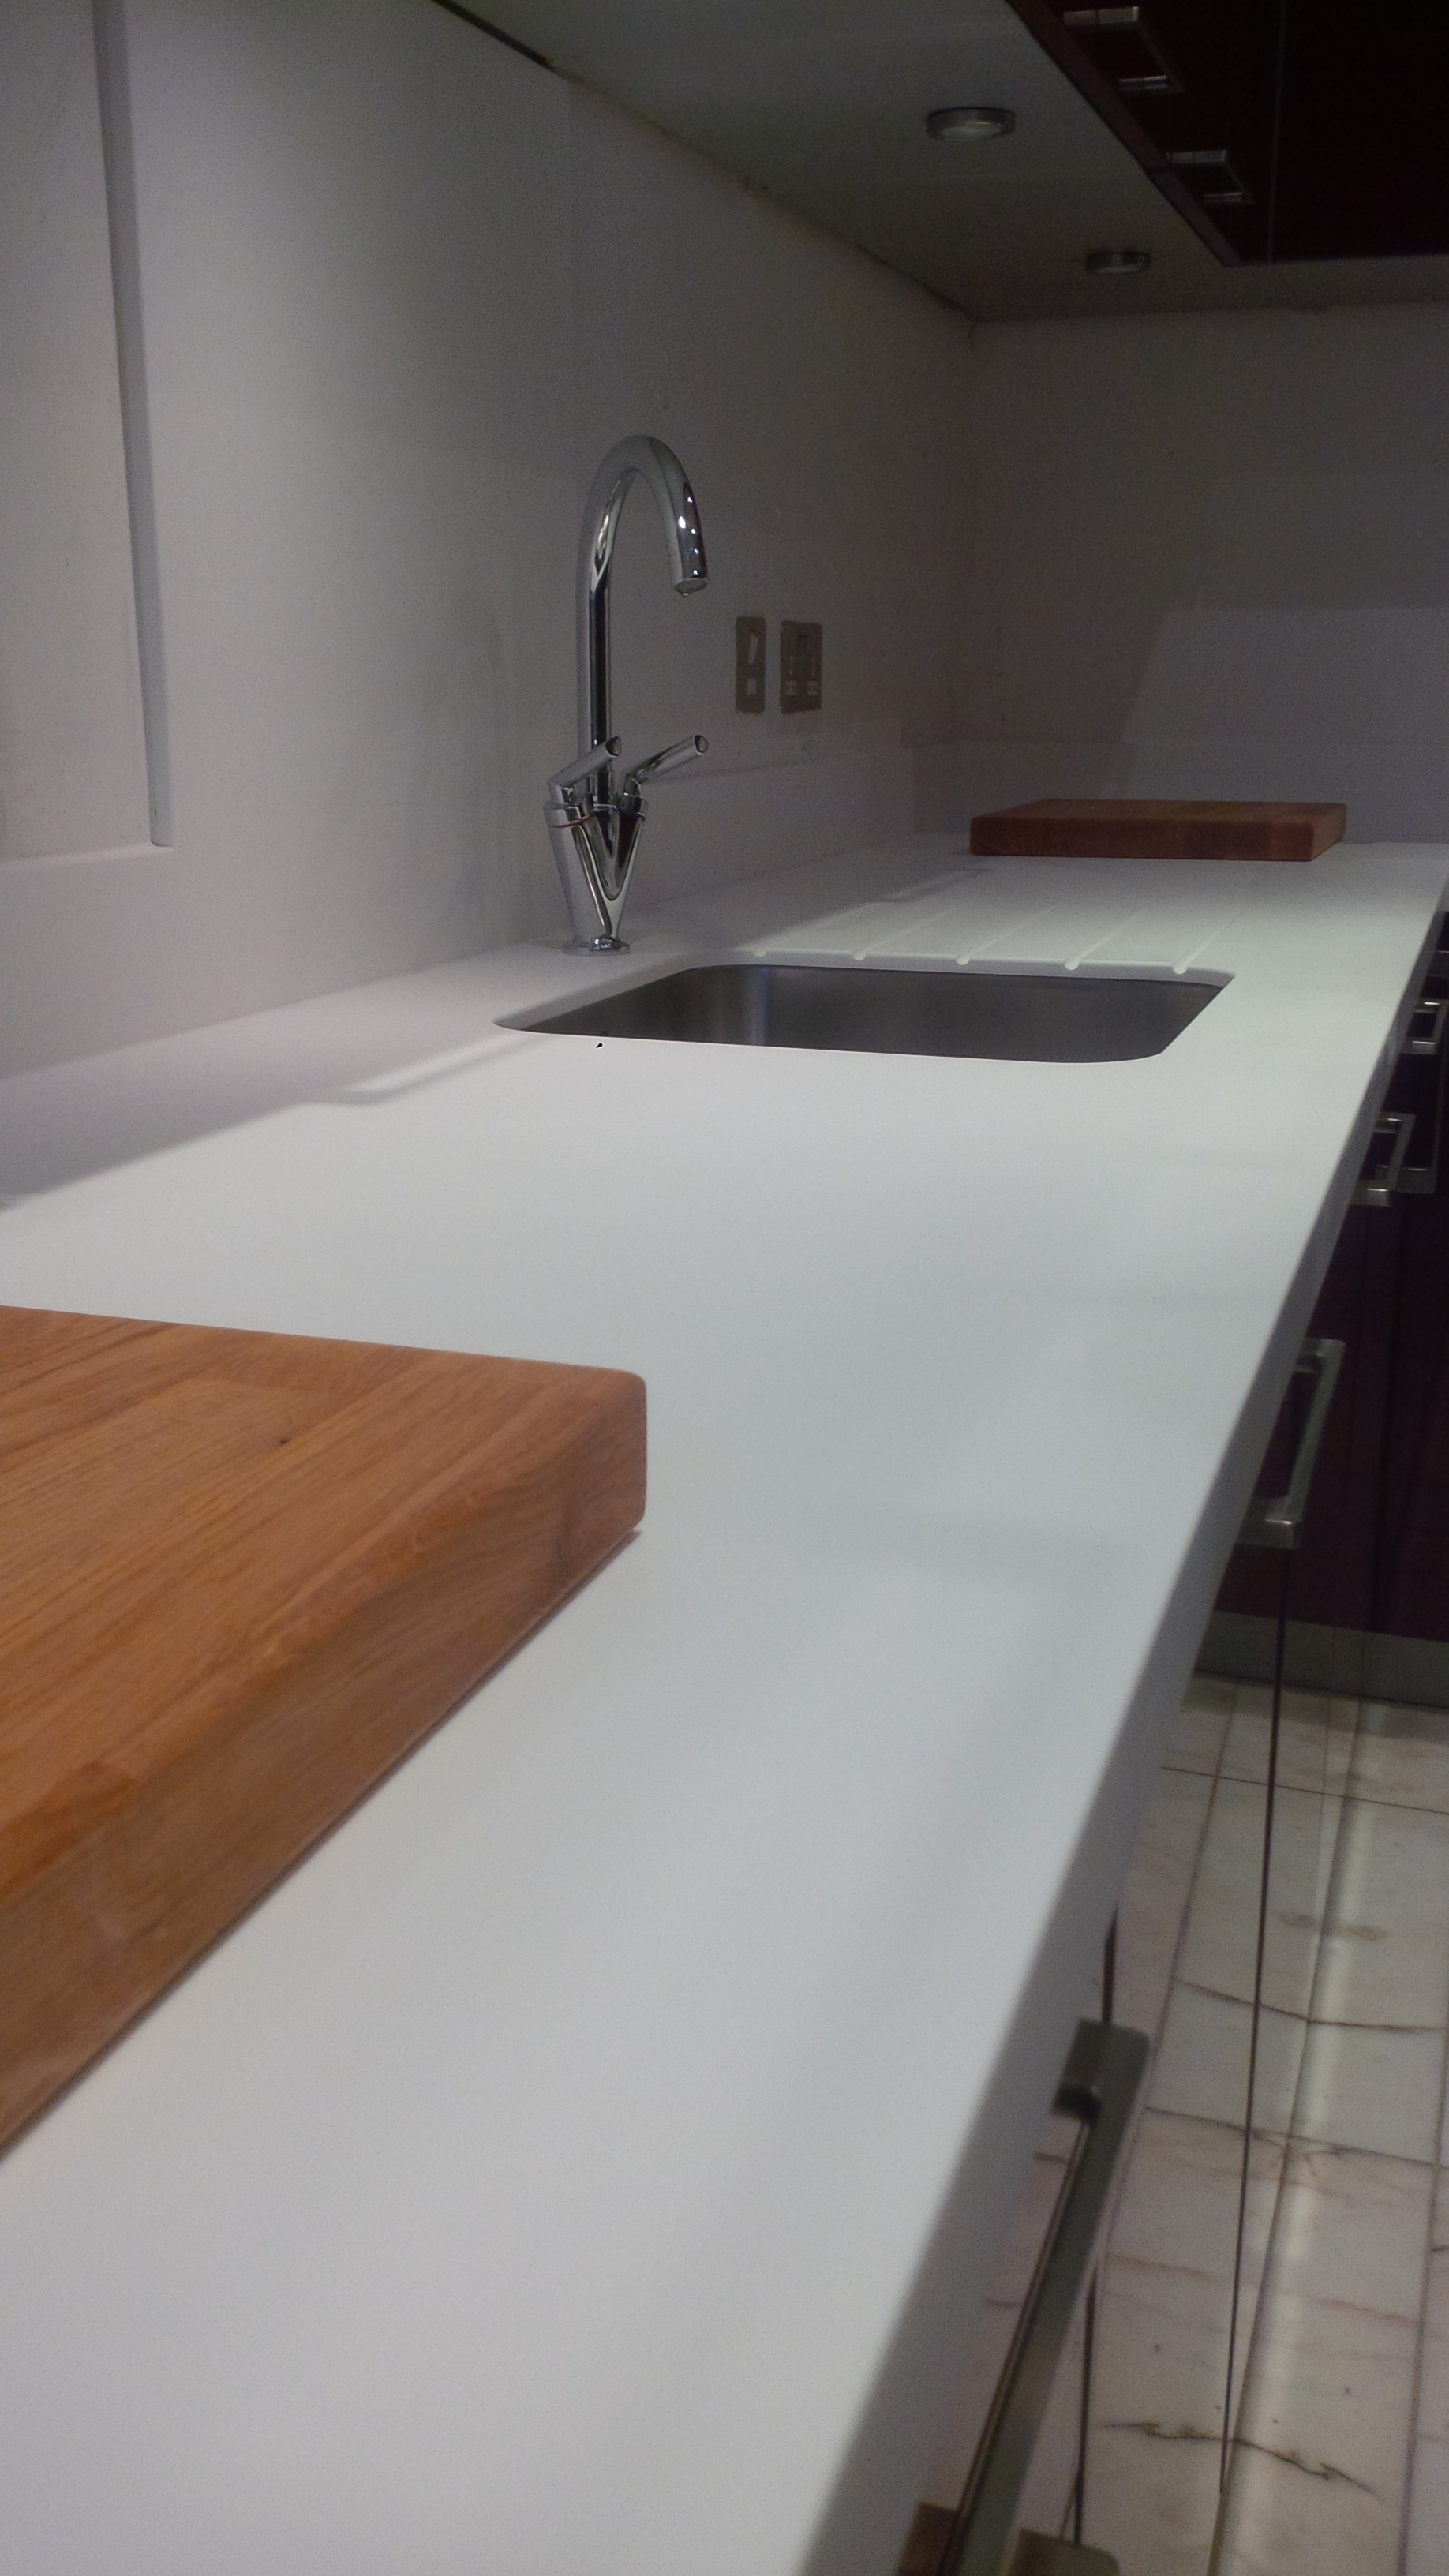 Replacement of granite worktops and upstands to glacier white corian and fitting of stainless steel  sink, by Designed Bespoke Joinery 1